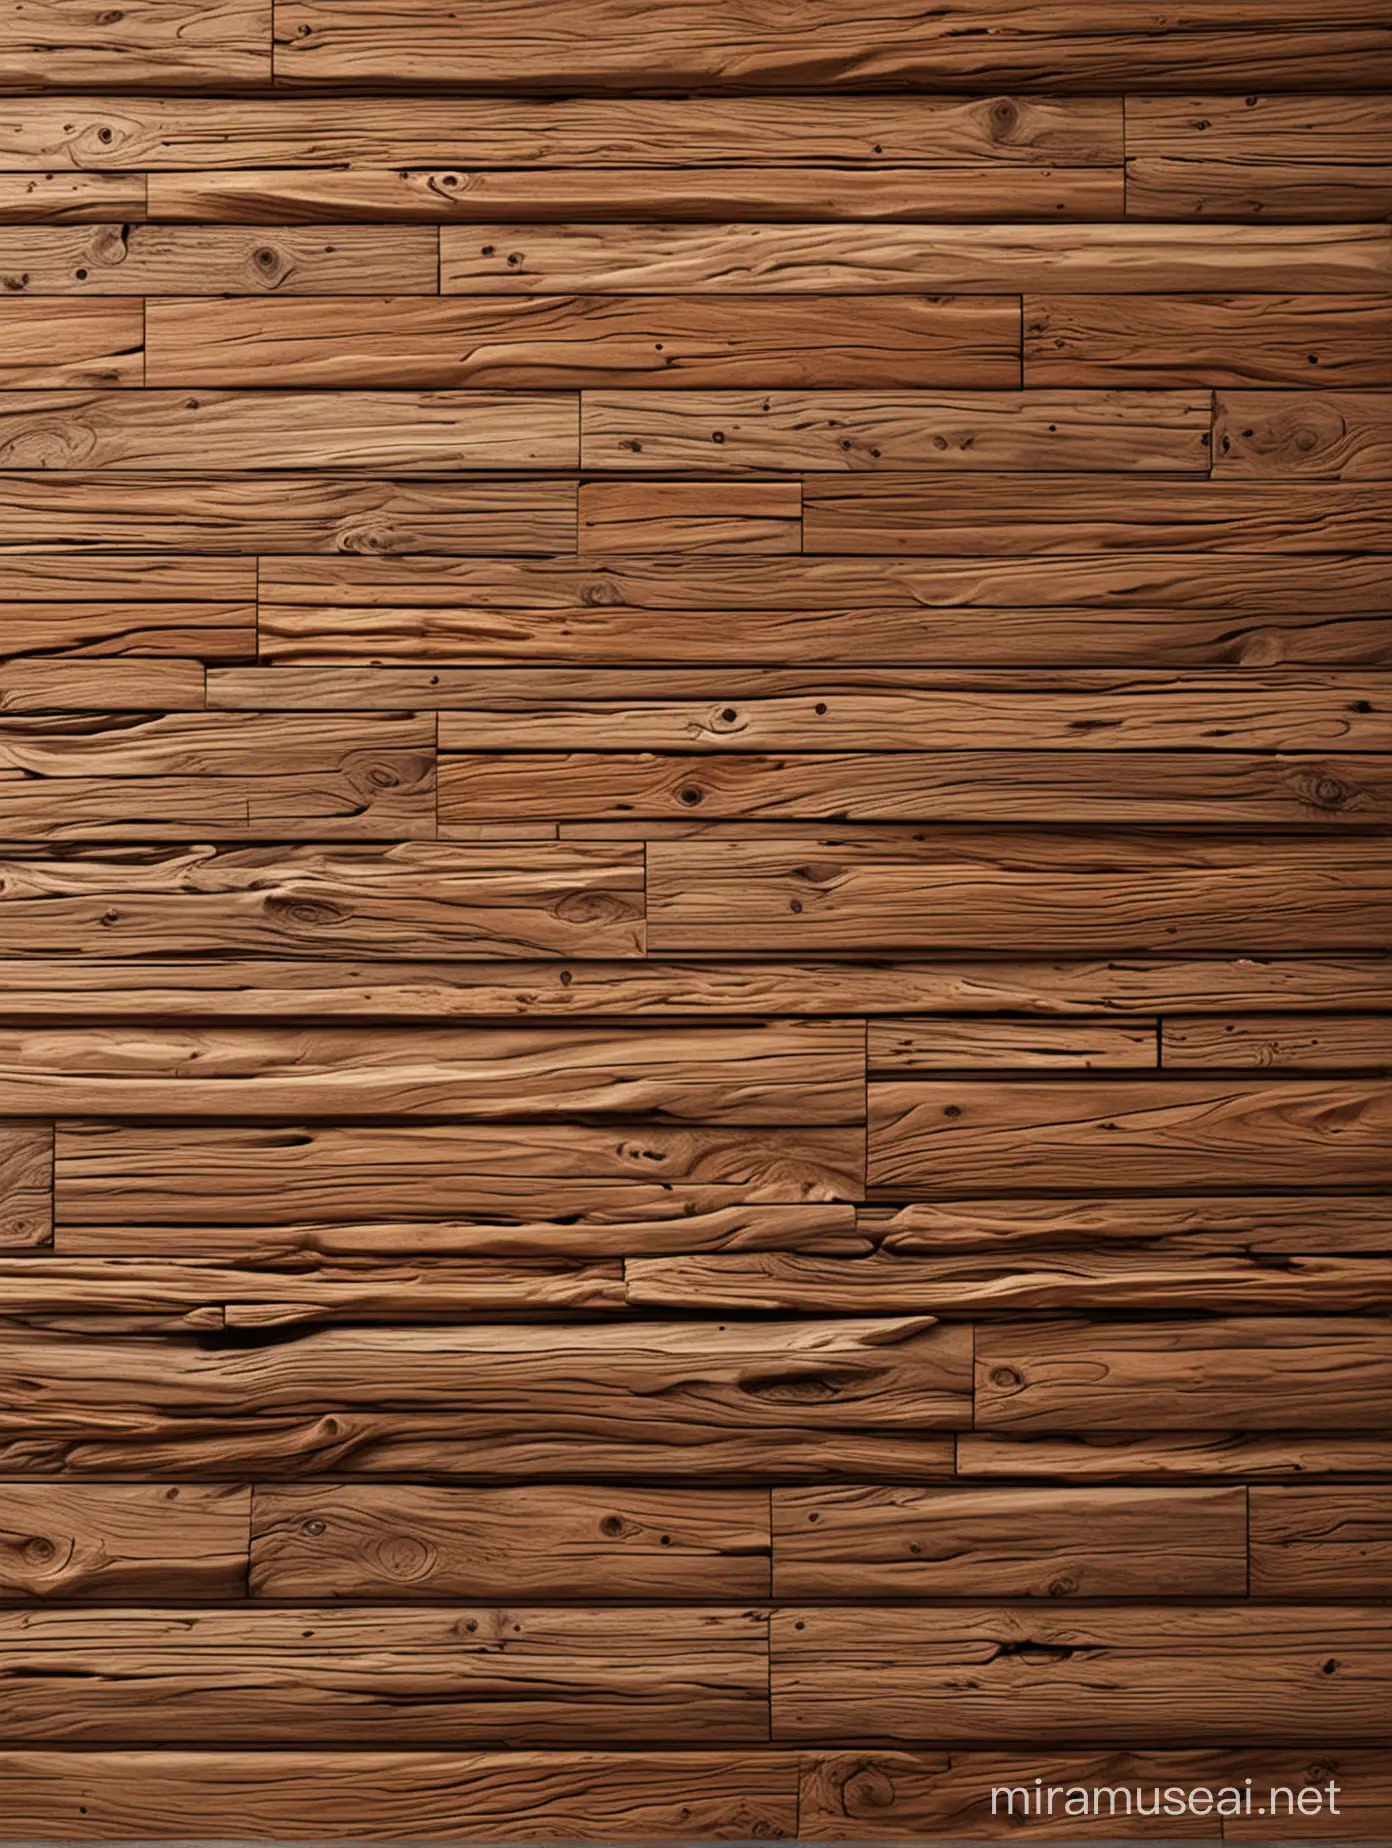 Realistic Wooden Wall Texture Background